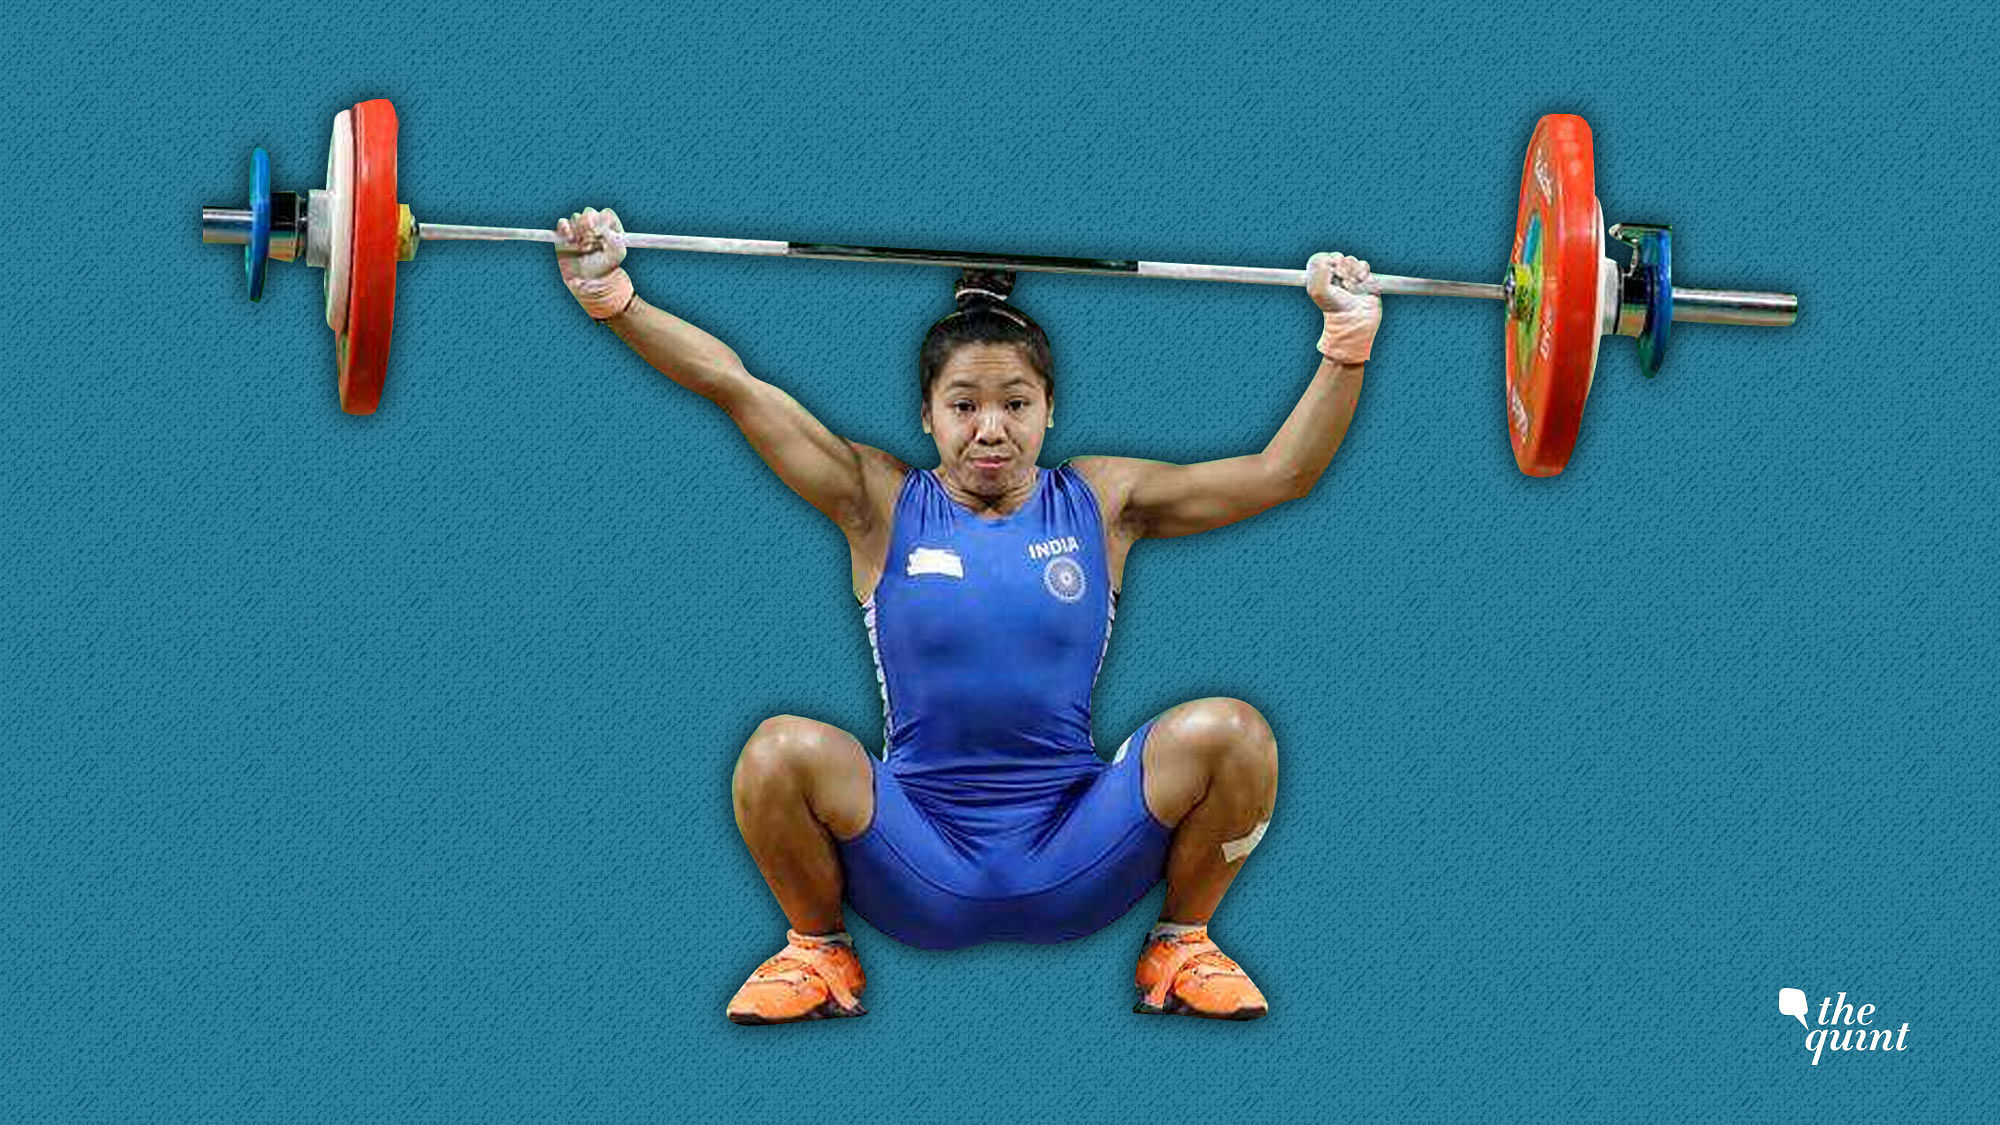 Mirabai Chanu will be representing India in the 48kg category of the weightlifting event at the Gold Coast CWG.